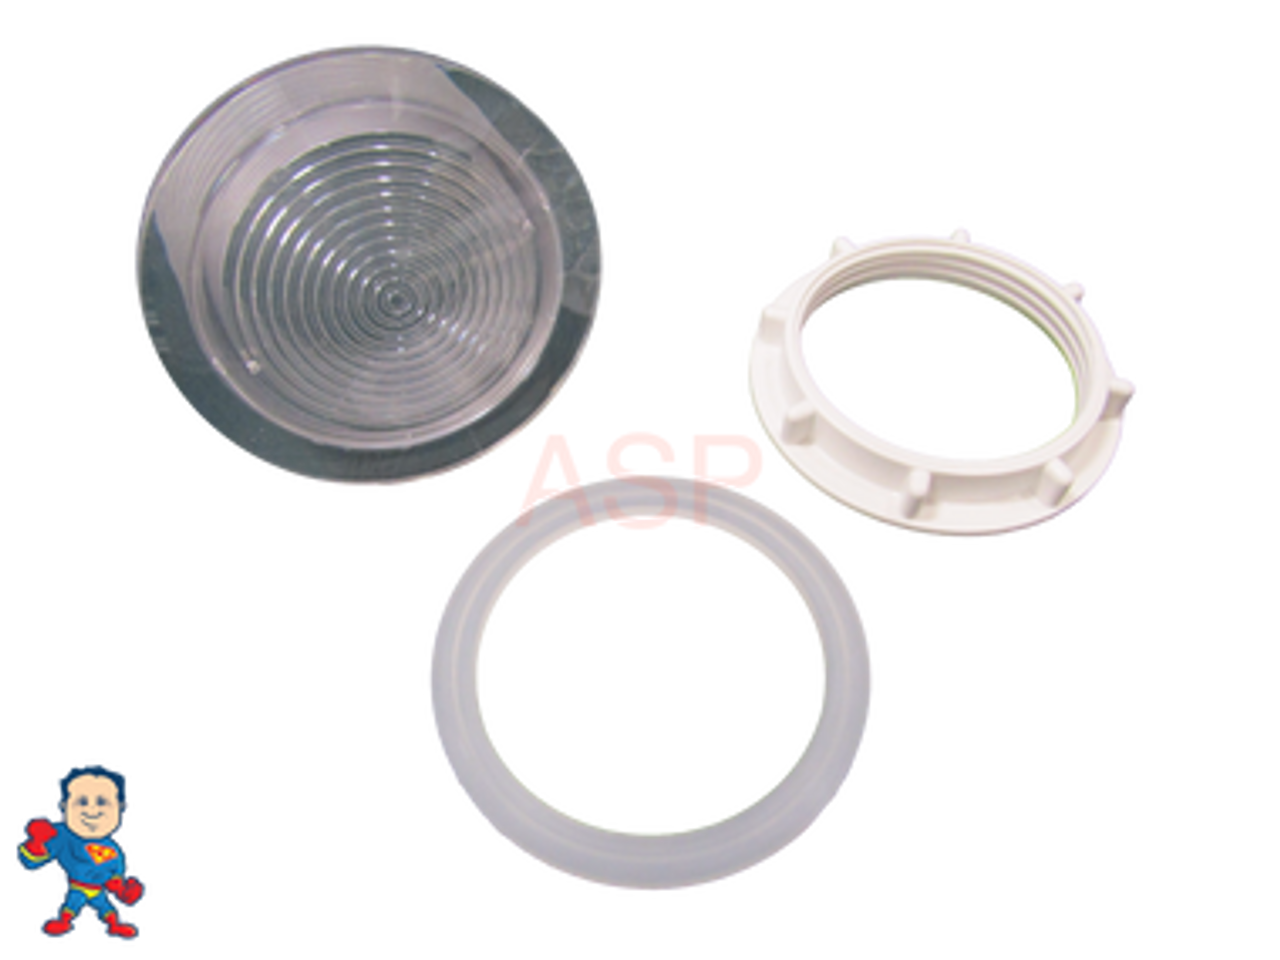 Spa Hot Tub Light 3 1/4" Face Replacement Part Lens 2 1/2" Hole No Bulb Holder